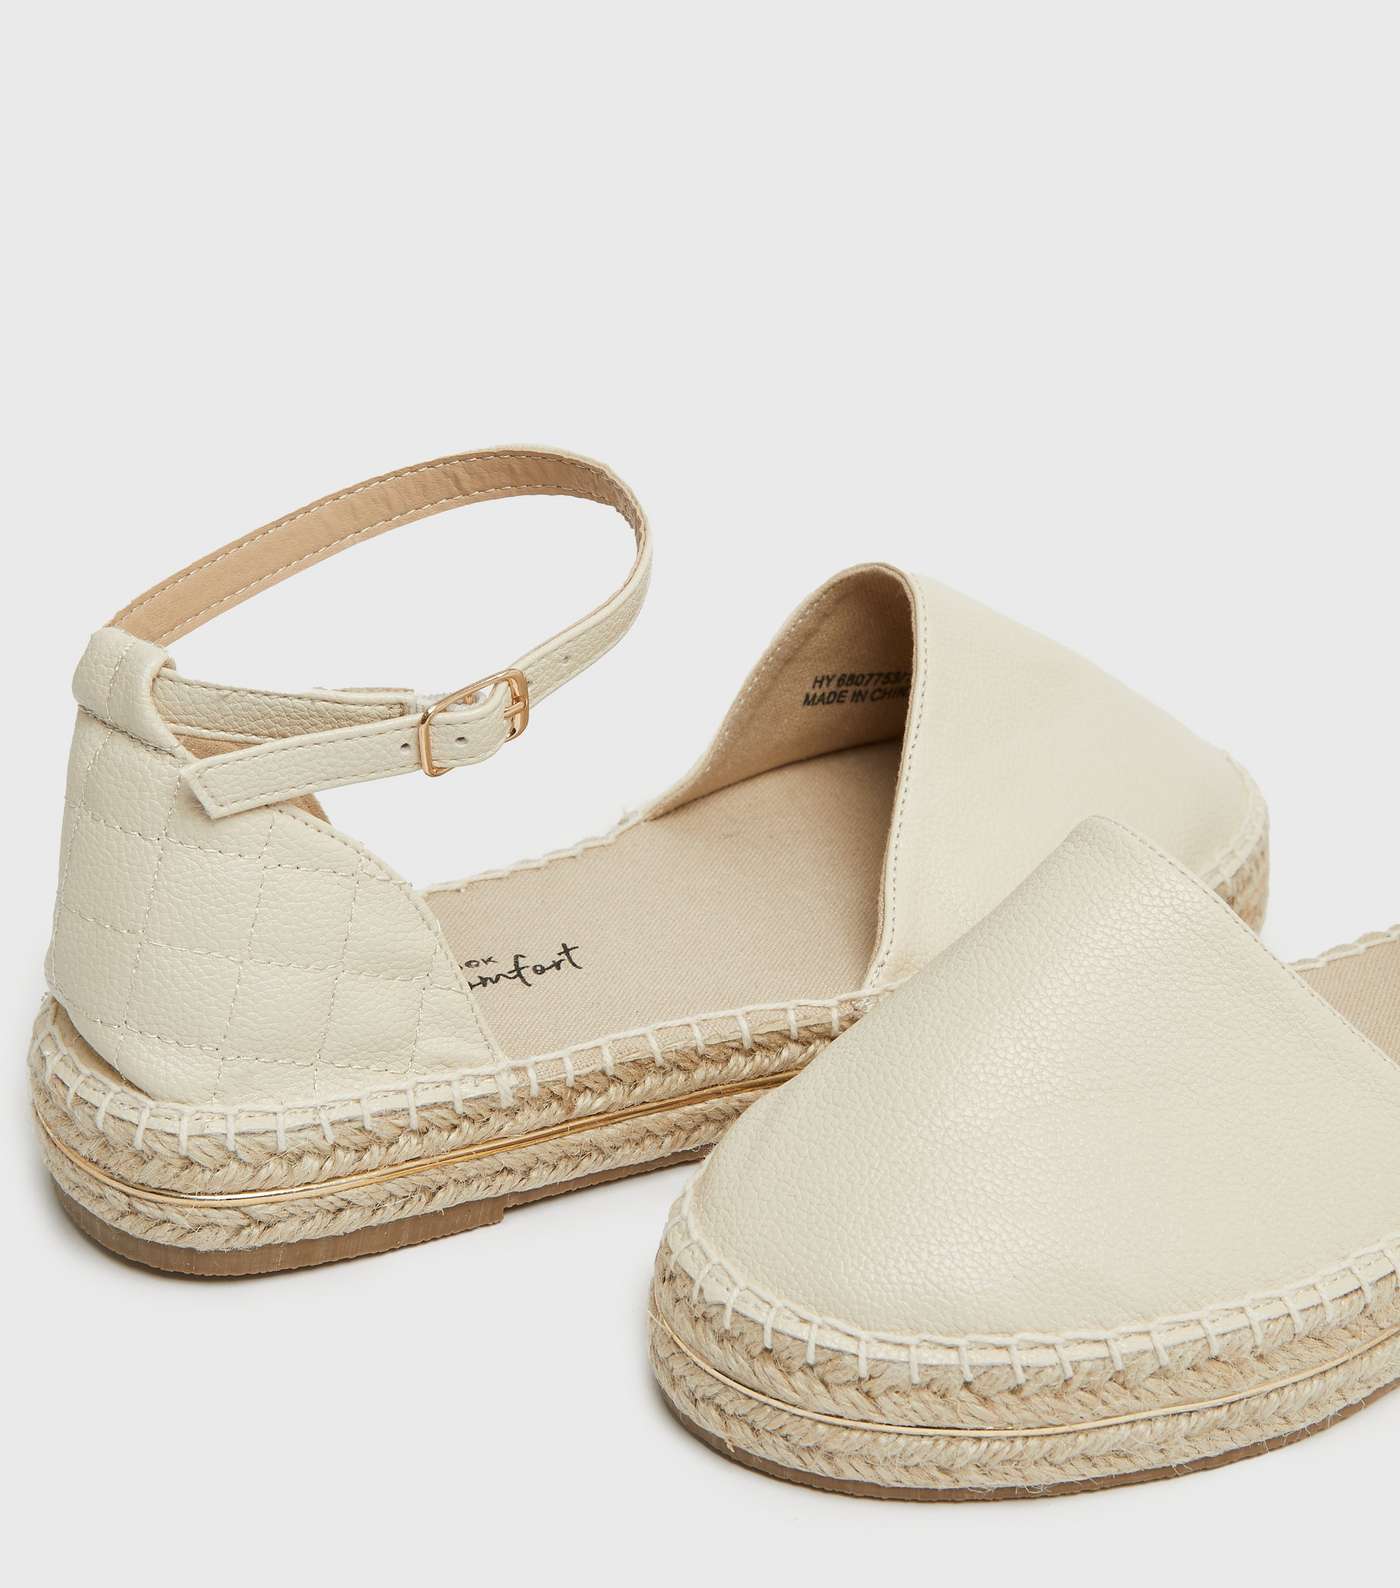 Off White Leather-Look Quilted Espadrilles Image 3